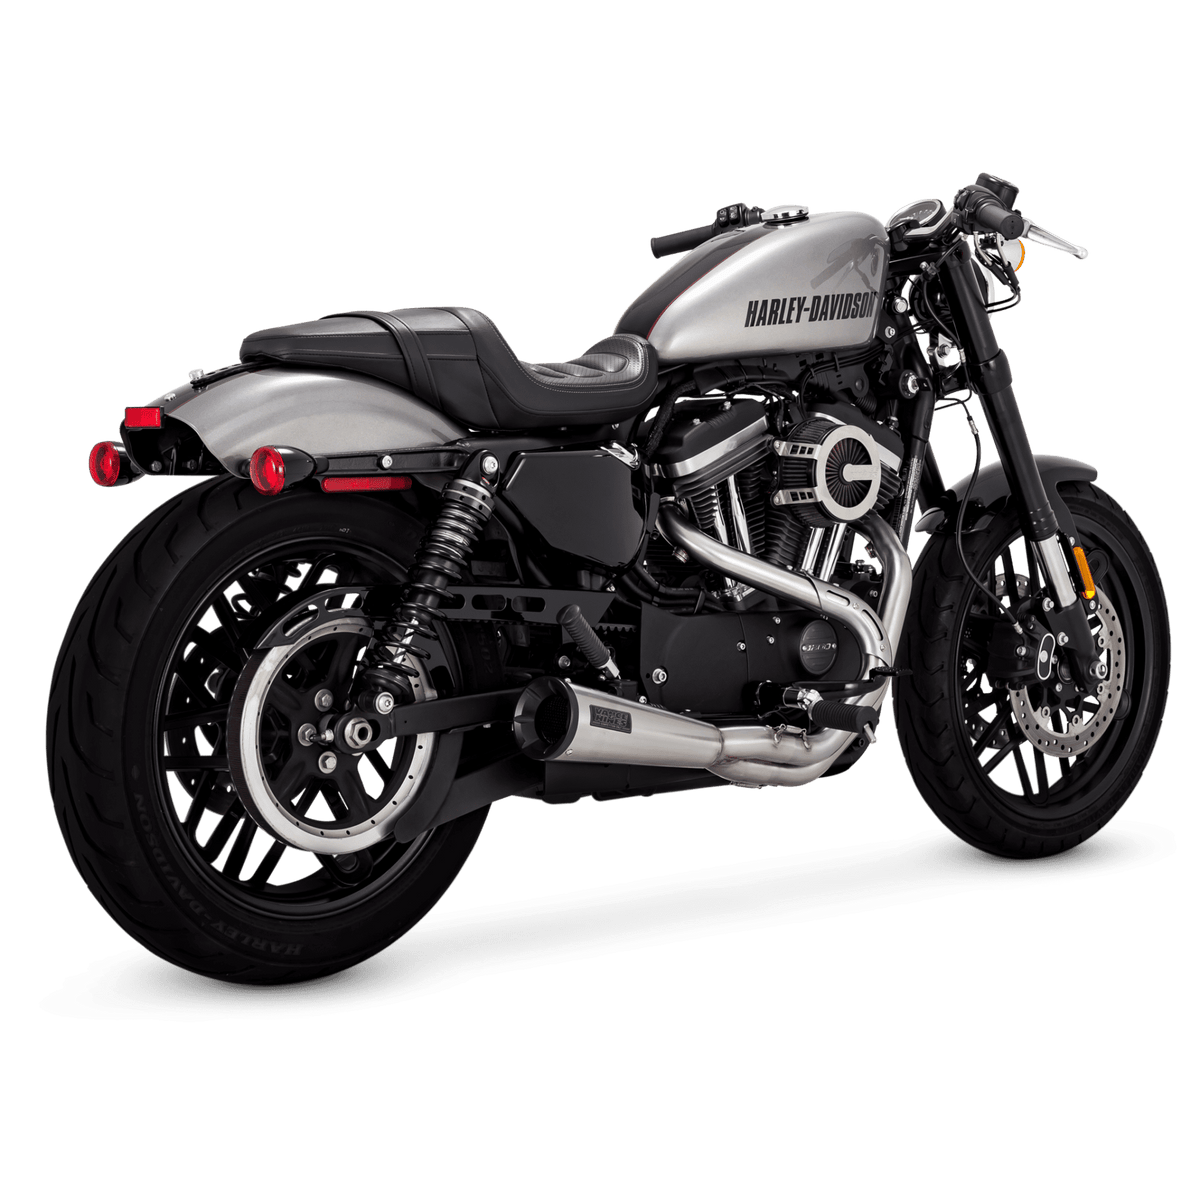 Upsweep 2:1 Exhaust System - Sportster